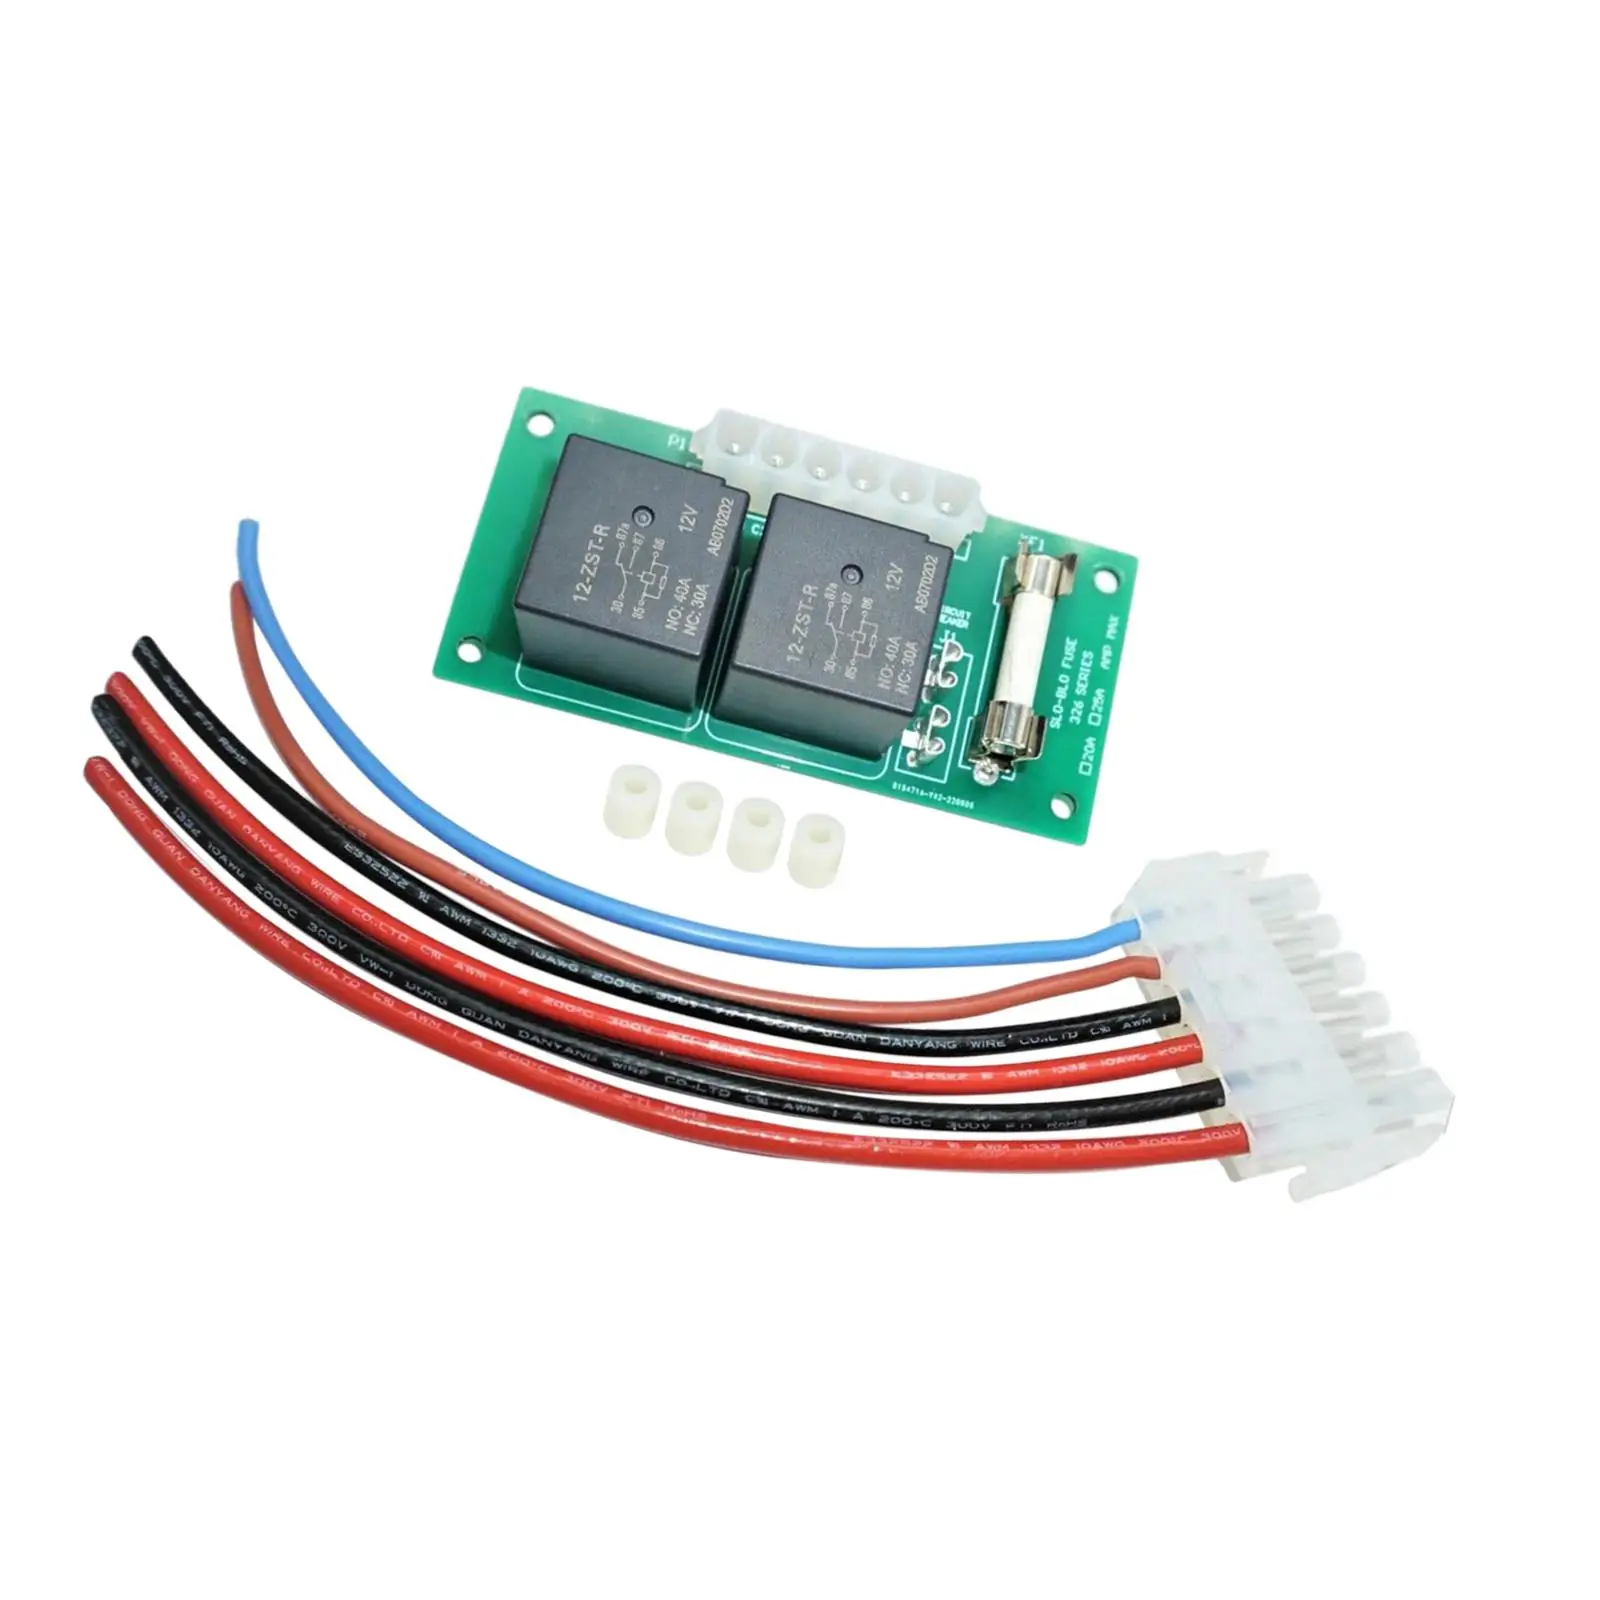 140-1130 Slide Out Relay Control Boards Easy to Install Vehicle with Spacers